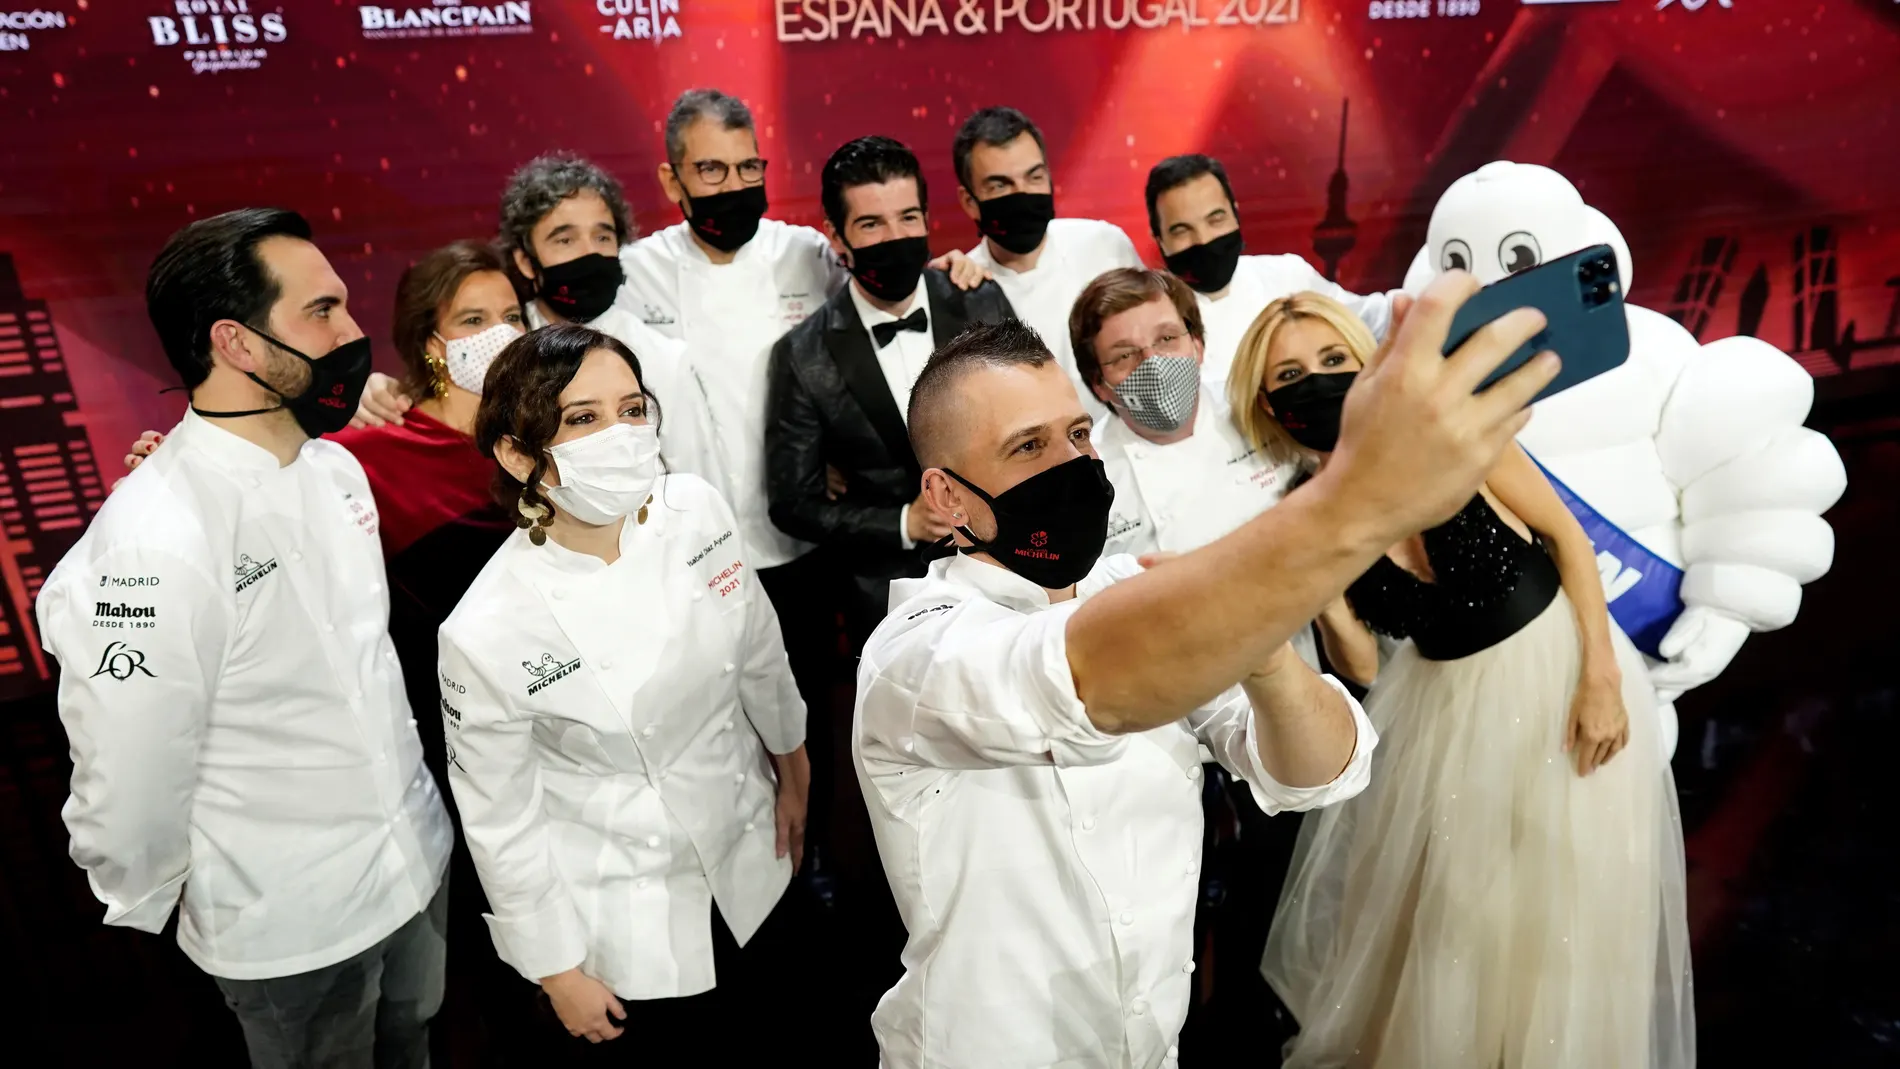 Madrid (Spain), 15/12/2020.- A handout photo released by Madrid's regional Presidency shows Spanish chef David Munoz (C, front) taking a selfie photo of Madrid's Regional President Isabel Diaz Ayuso (2-L,2nd row), Madrid's Mayor Jose Luis Martinez-Almeida (2-R, 2nd row) and gala host Cayetana Guillen-Cuervo (R, 2nd row), chefs Diego Guerrero (3-L, 3rd row), Paco Roncero (4-L, 3rd row), gala host Miguel Angel Munoz (3-R, 3rd row) and chef Ramon Freixa (2-R, 3rd row), among others, during the 2021 Michelin Guide Gala for Spain and Portugal held in Madrid, Spain, 14 December 2020 (issued on 15 Dcember 2020). (España) EFE/EPA/Madrid's regional Presidency HANDOUT ATTENTION EDITORS: IMAGE TO BE USED ONLY IN RELATION TO THE STATED EVENT HANDOUT EDITORIAL USE ONLY/NO SALES